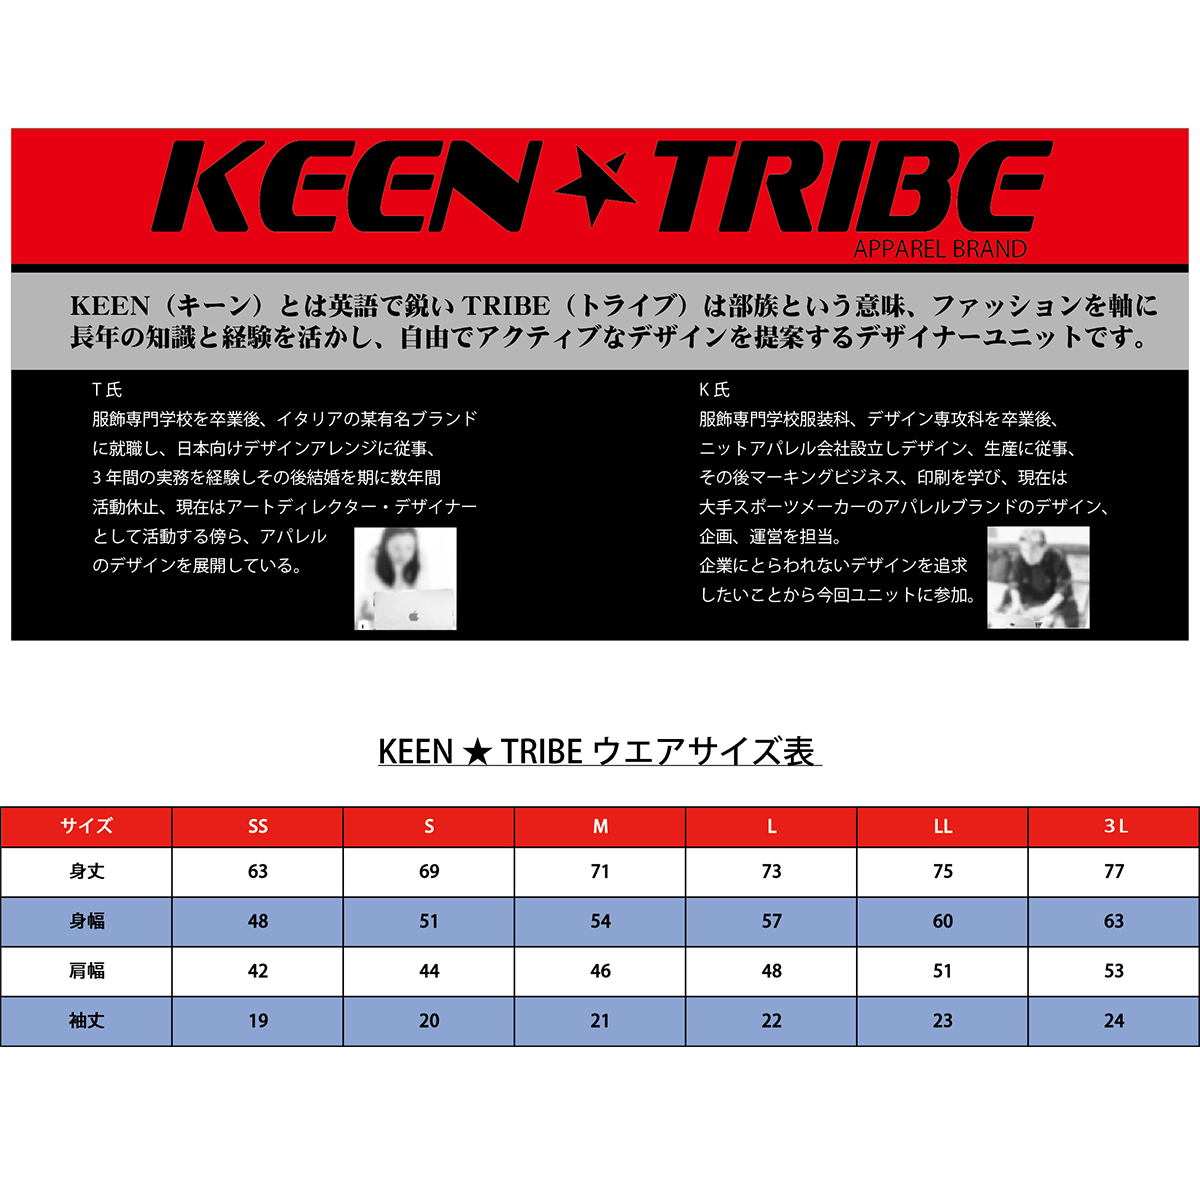 KEEN ★ TRIBE　KT-9(受注生産)